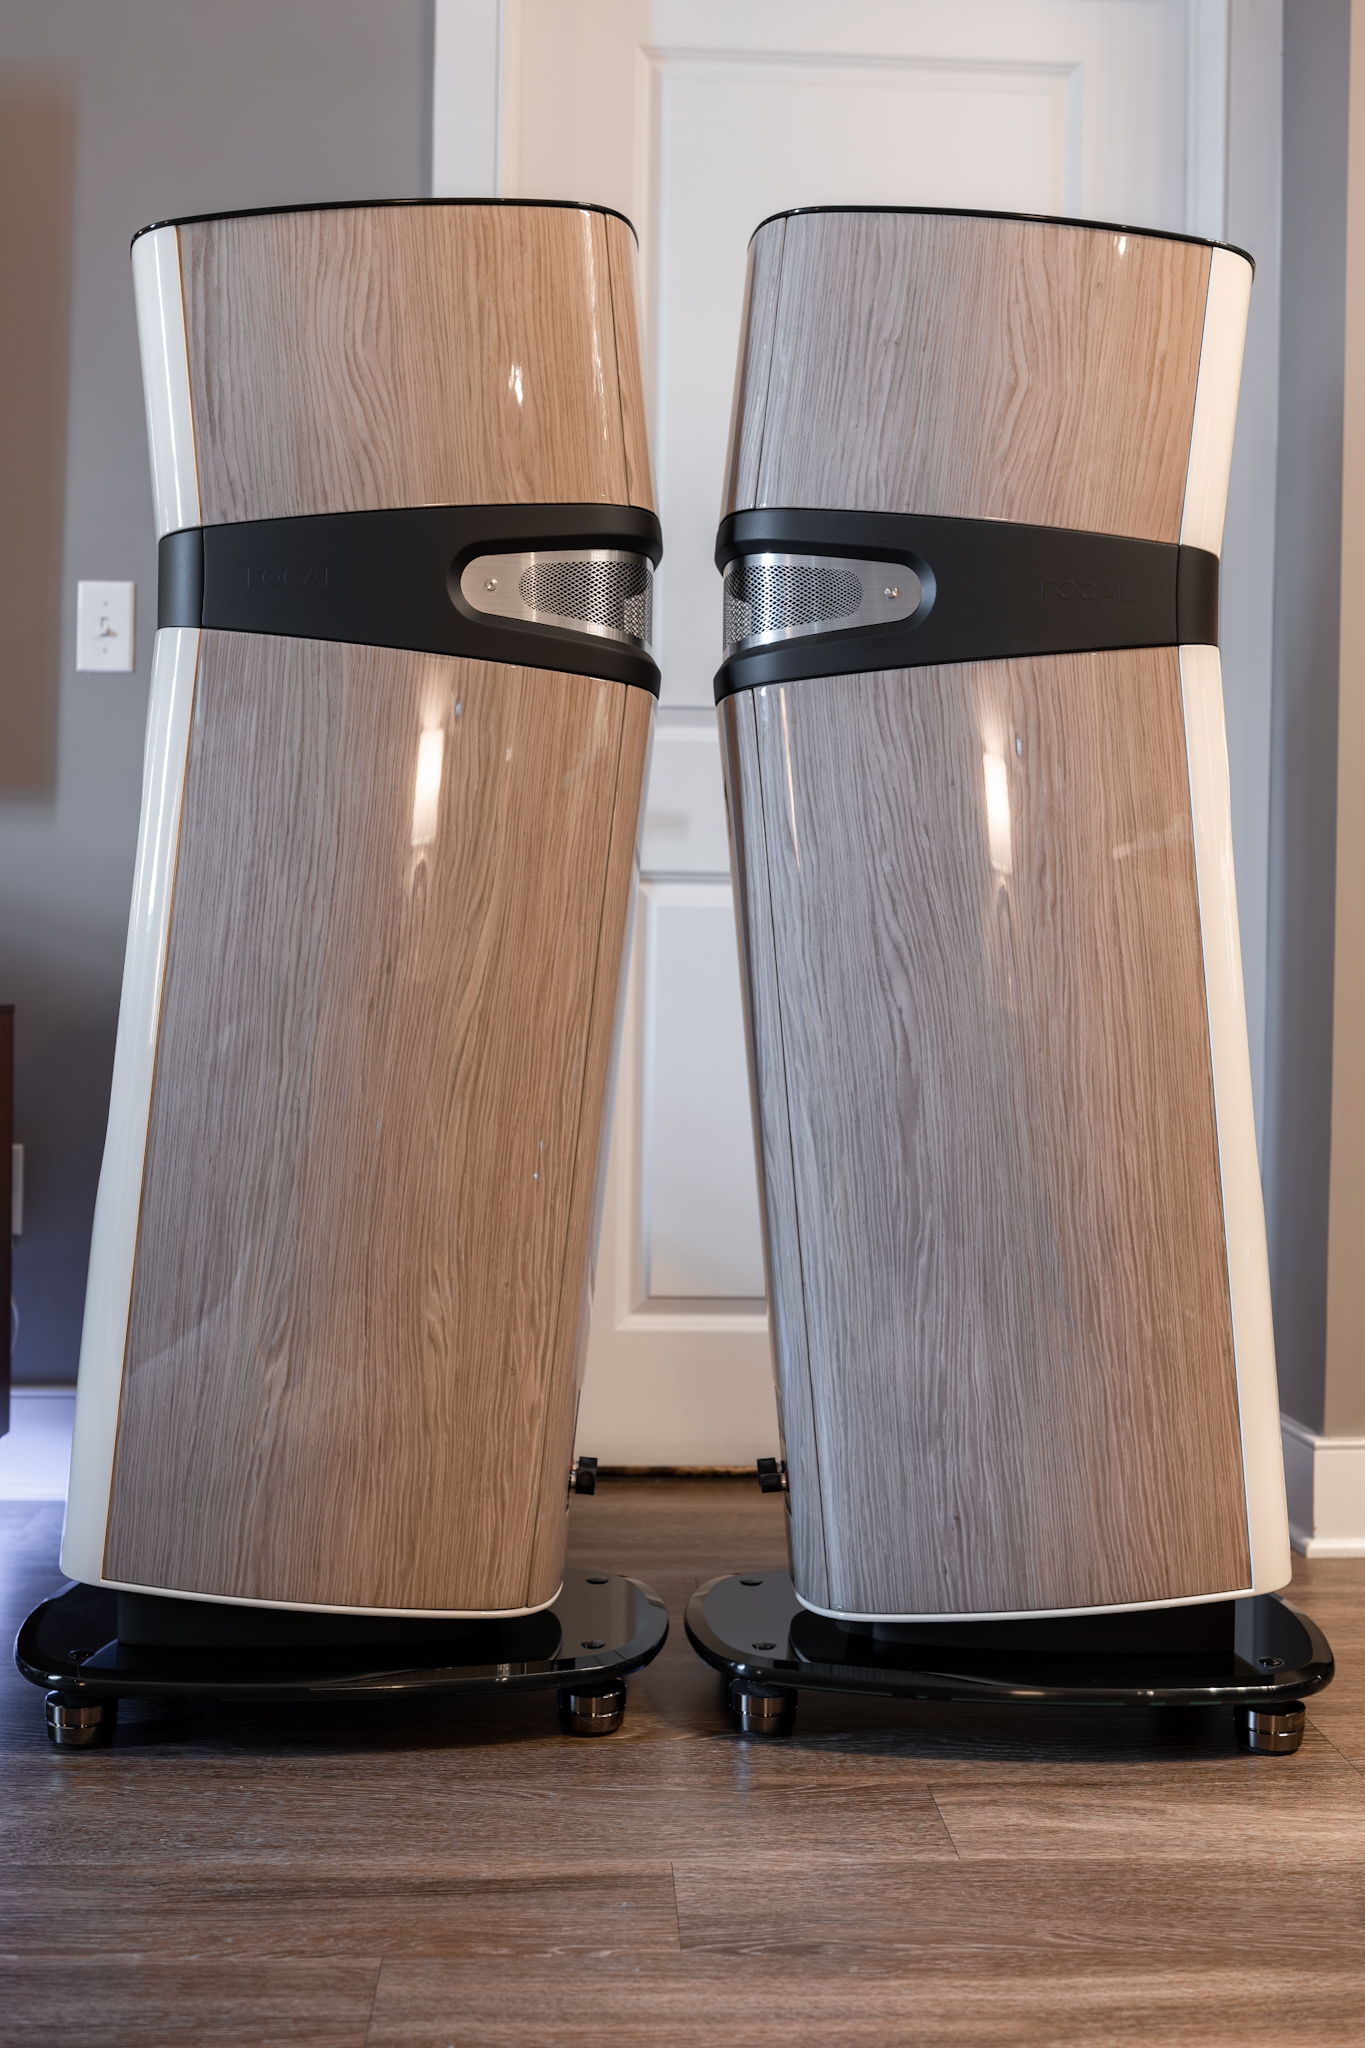 Focal Sopra N°3 and also N°2 in 100% Perfect Condition ... 5